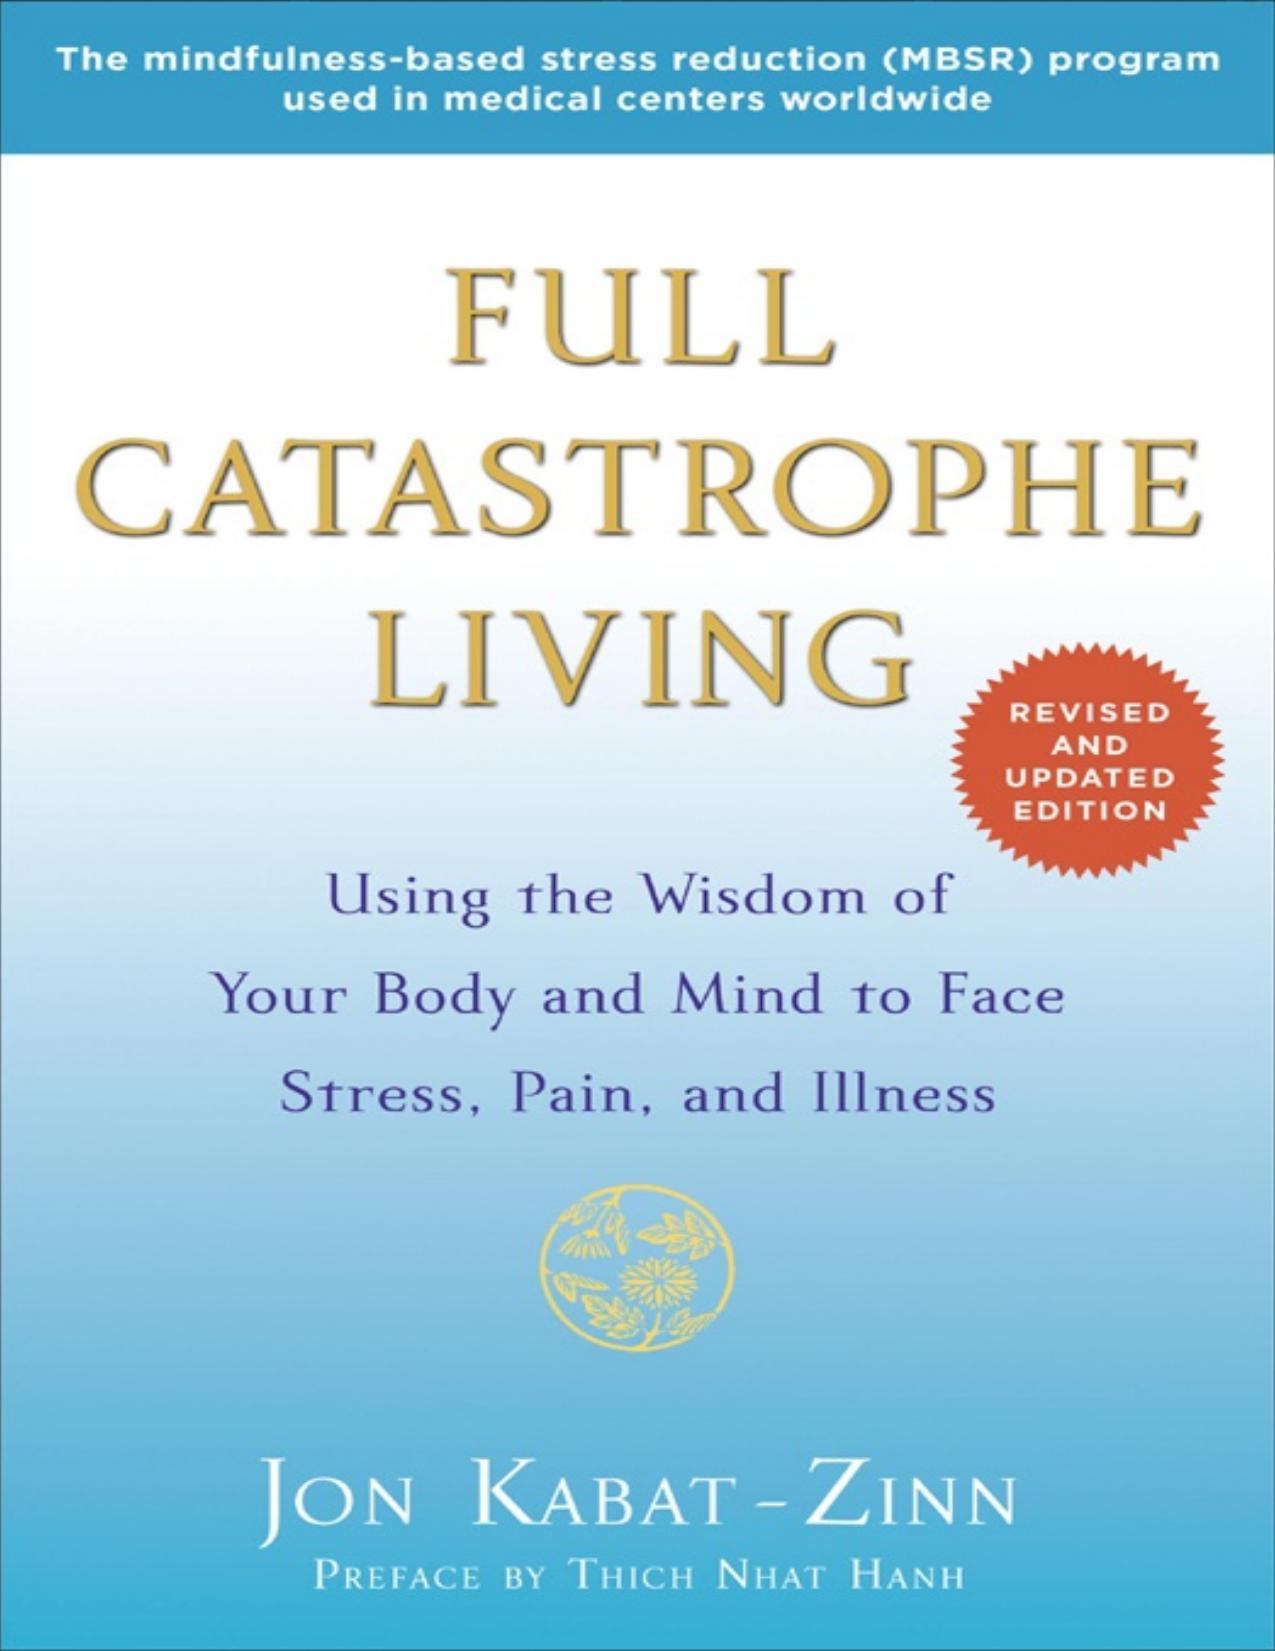 Full Catastrophe Living (Revised Edition)_ Using the Wisdom of Your Body and Mind to Face Stress, Pain, and Illness - Jon Kabat-Zinn.jpg